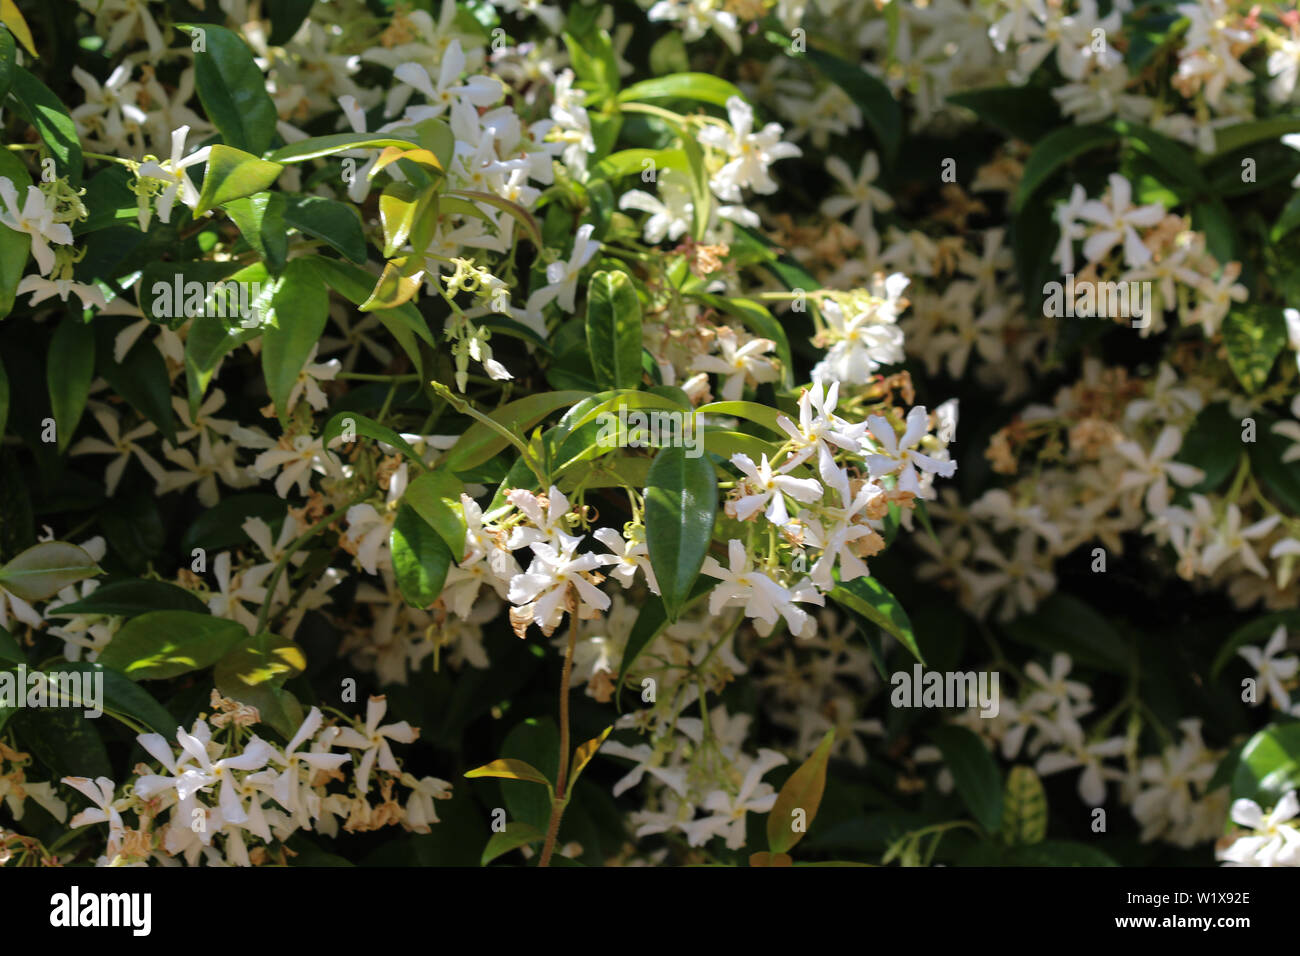 close up of Trachelospermum jasminoides, Common names include confederate jasmine, southern jasmine, star jasmine, confederate jessamine, and Chinese Stock Photo